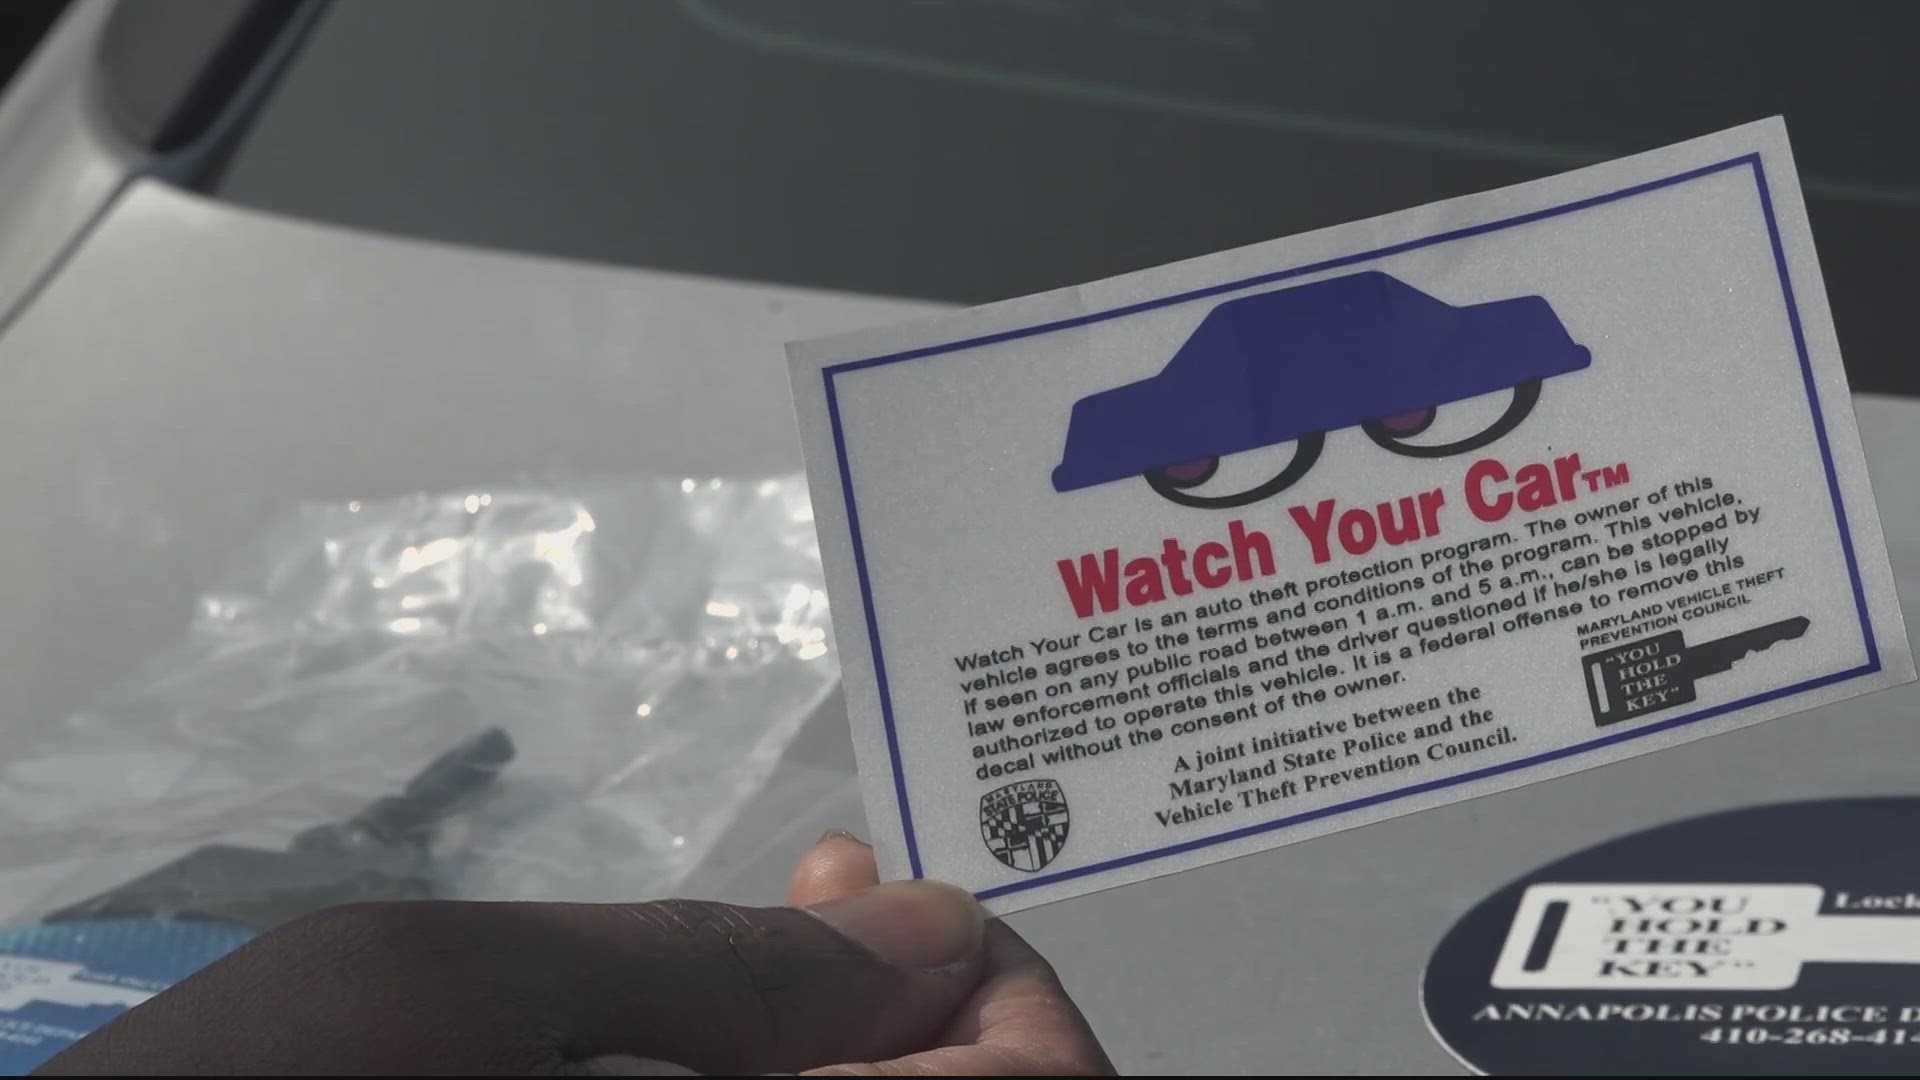 Here's what you need to know about the "Watch Your Car" program.